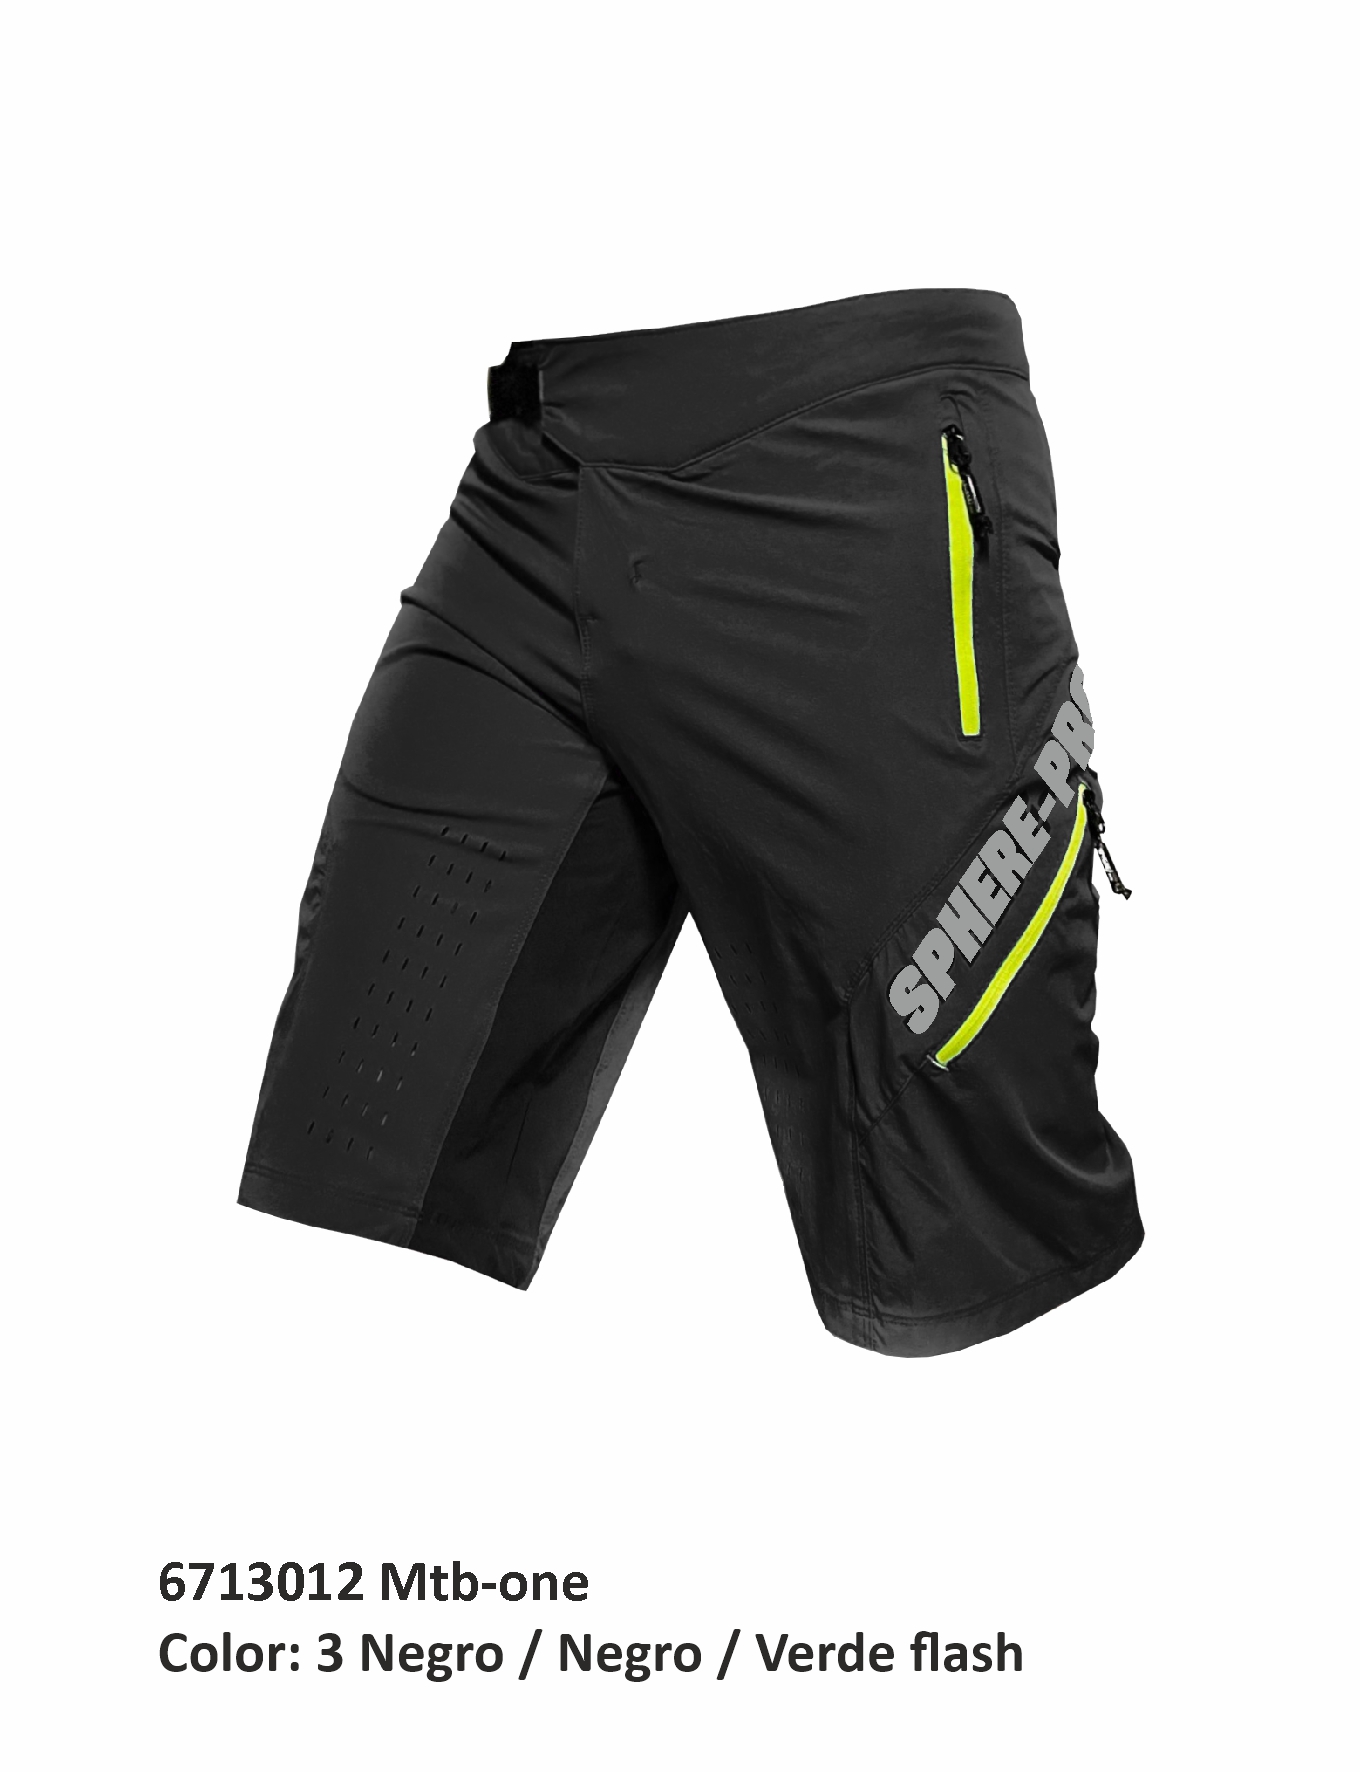 Sphere Pro | MTB complemented with Men's Culotte